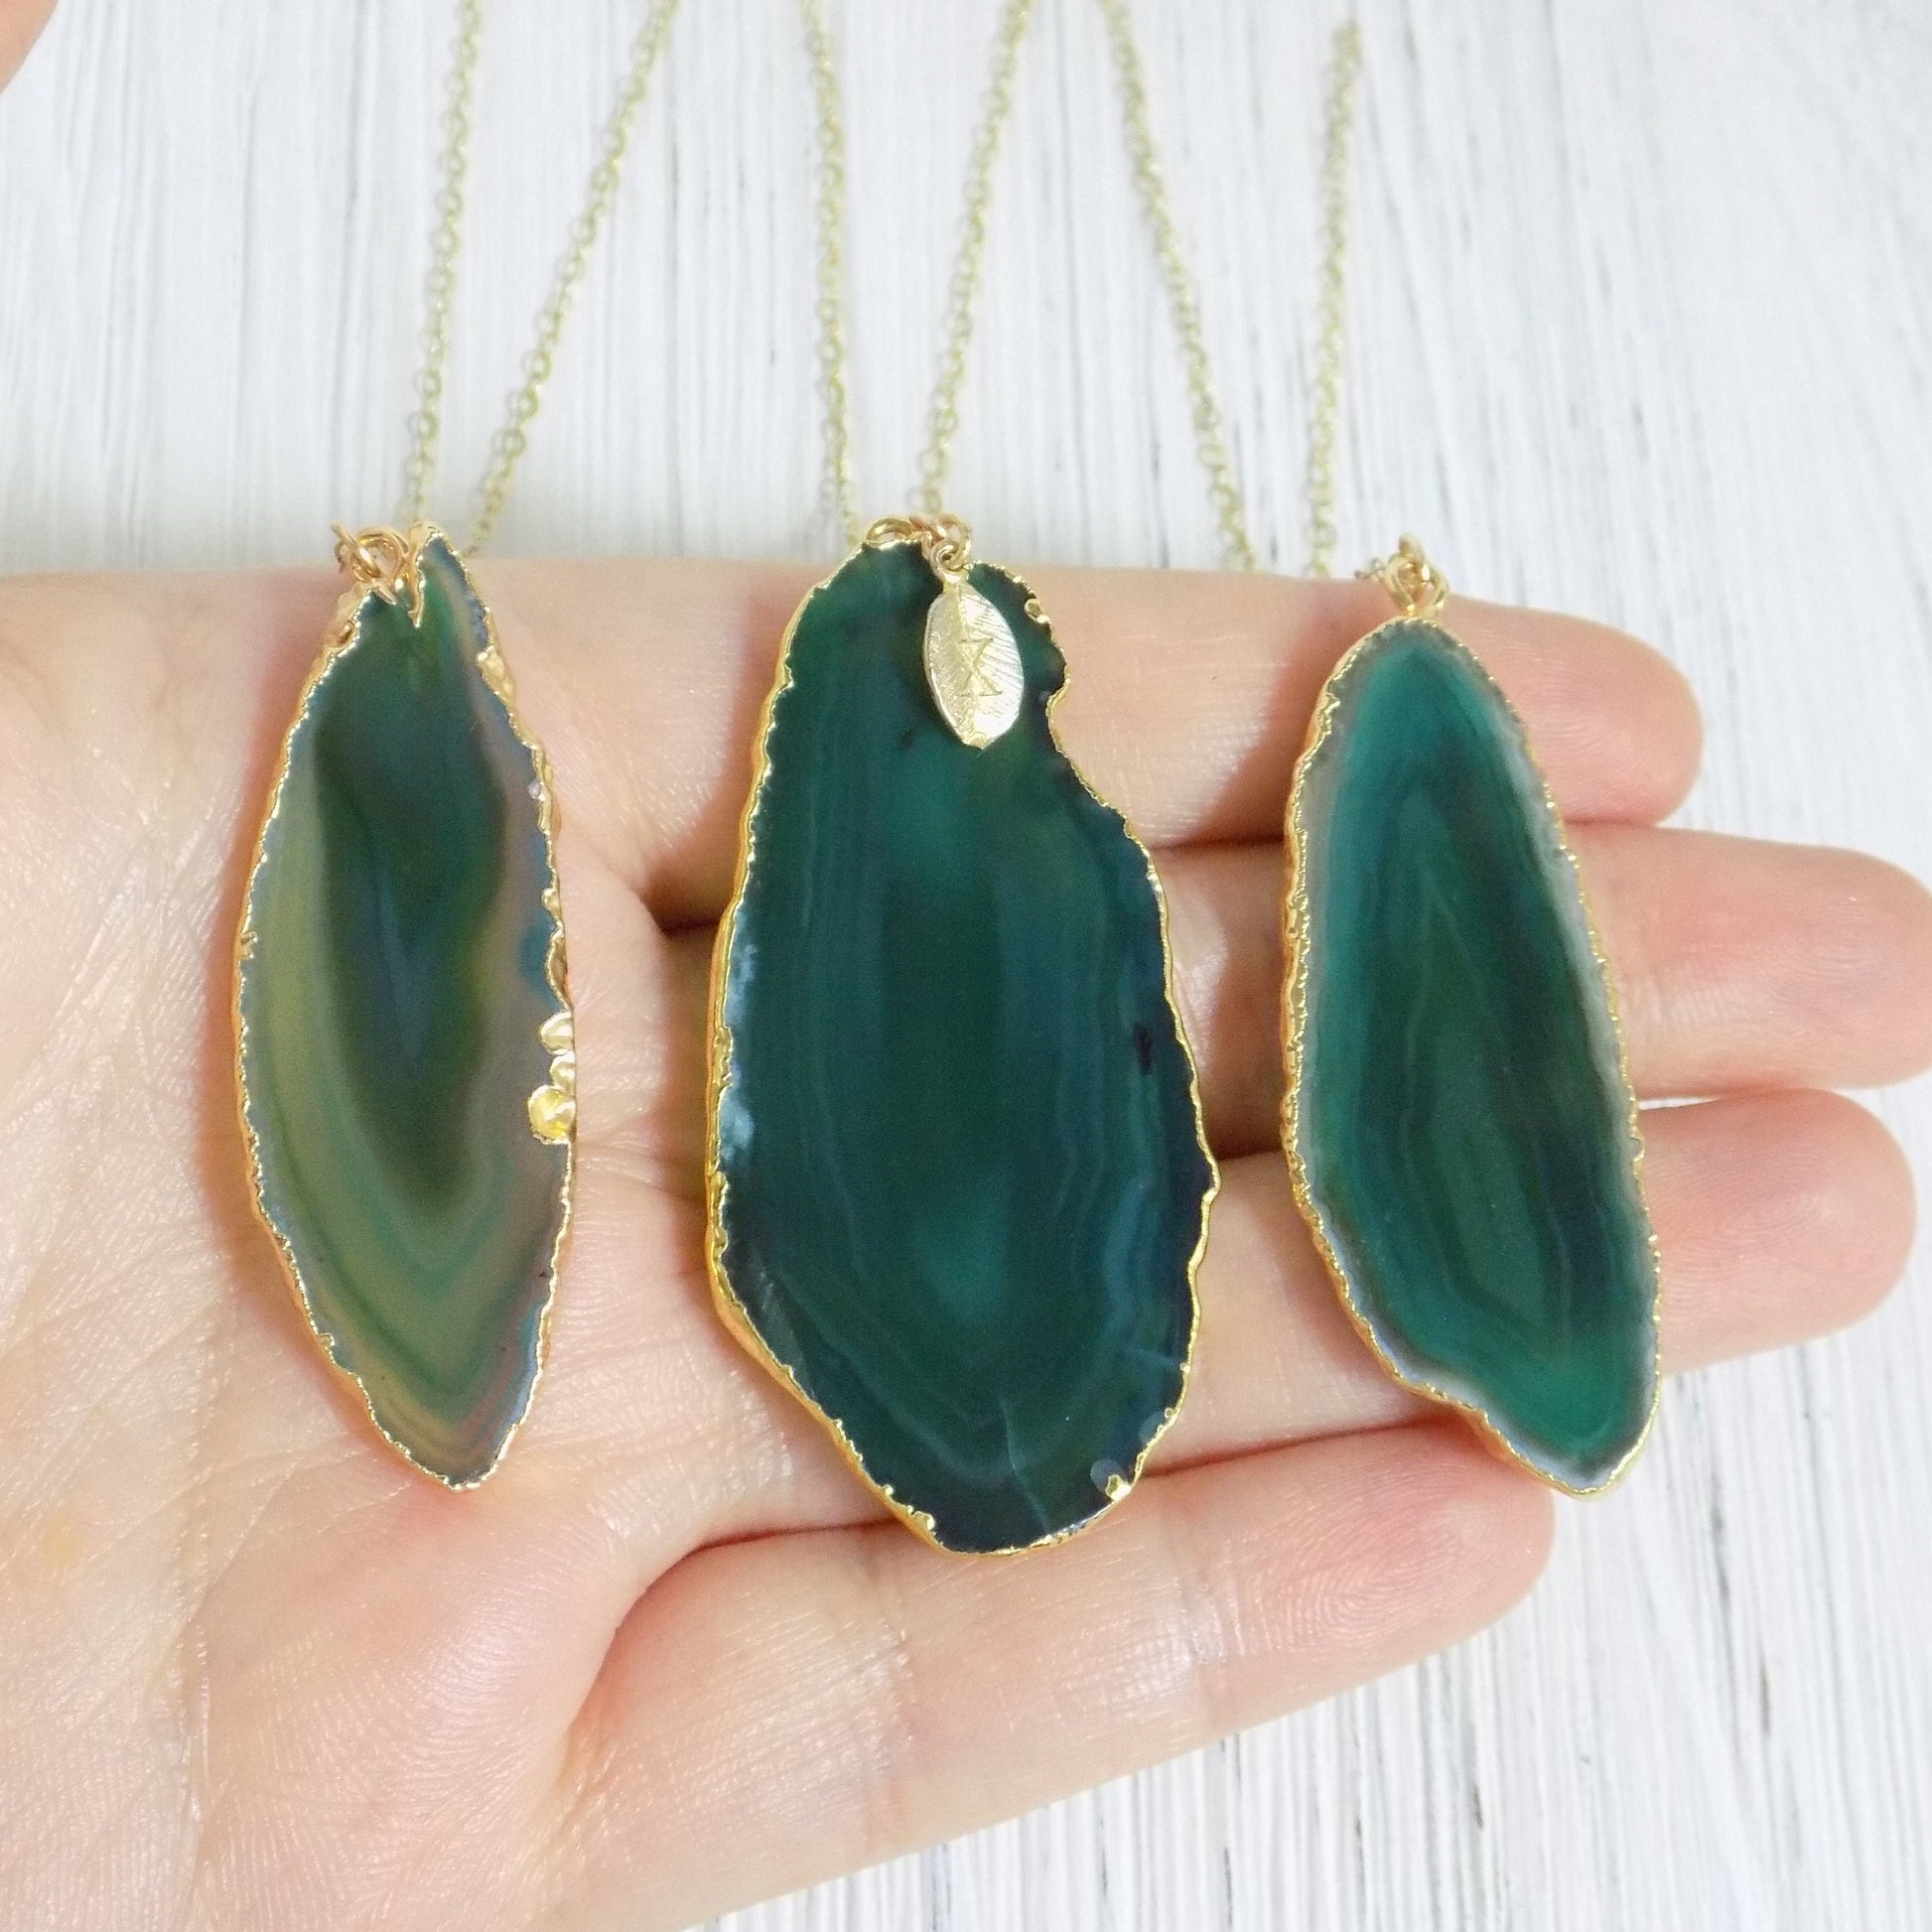 Boho Agate Necklace - Green Agate Necklace